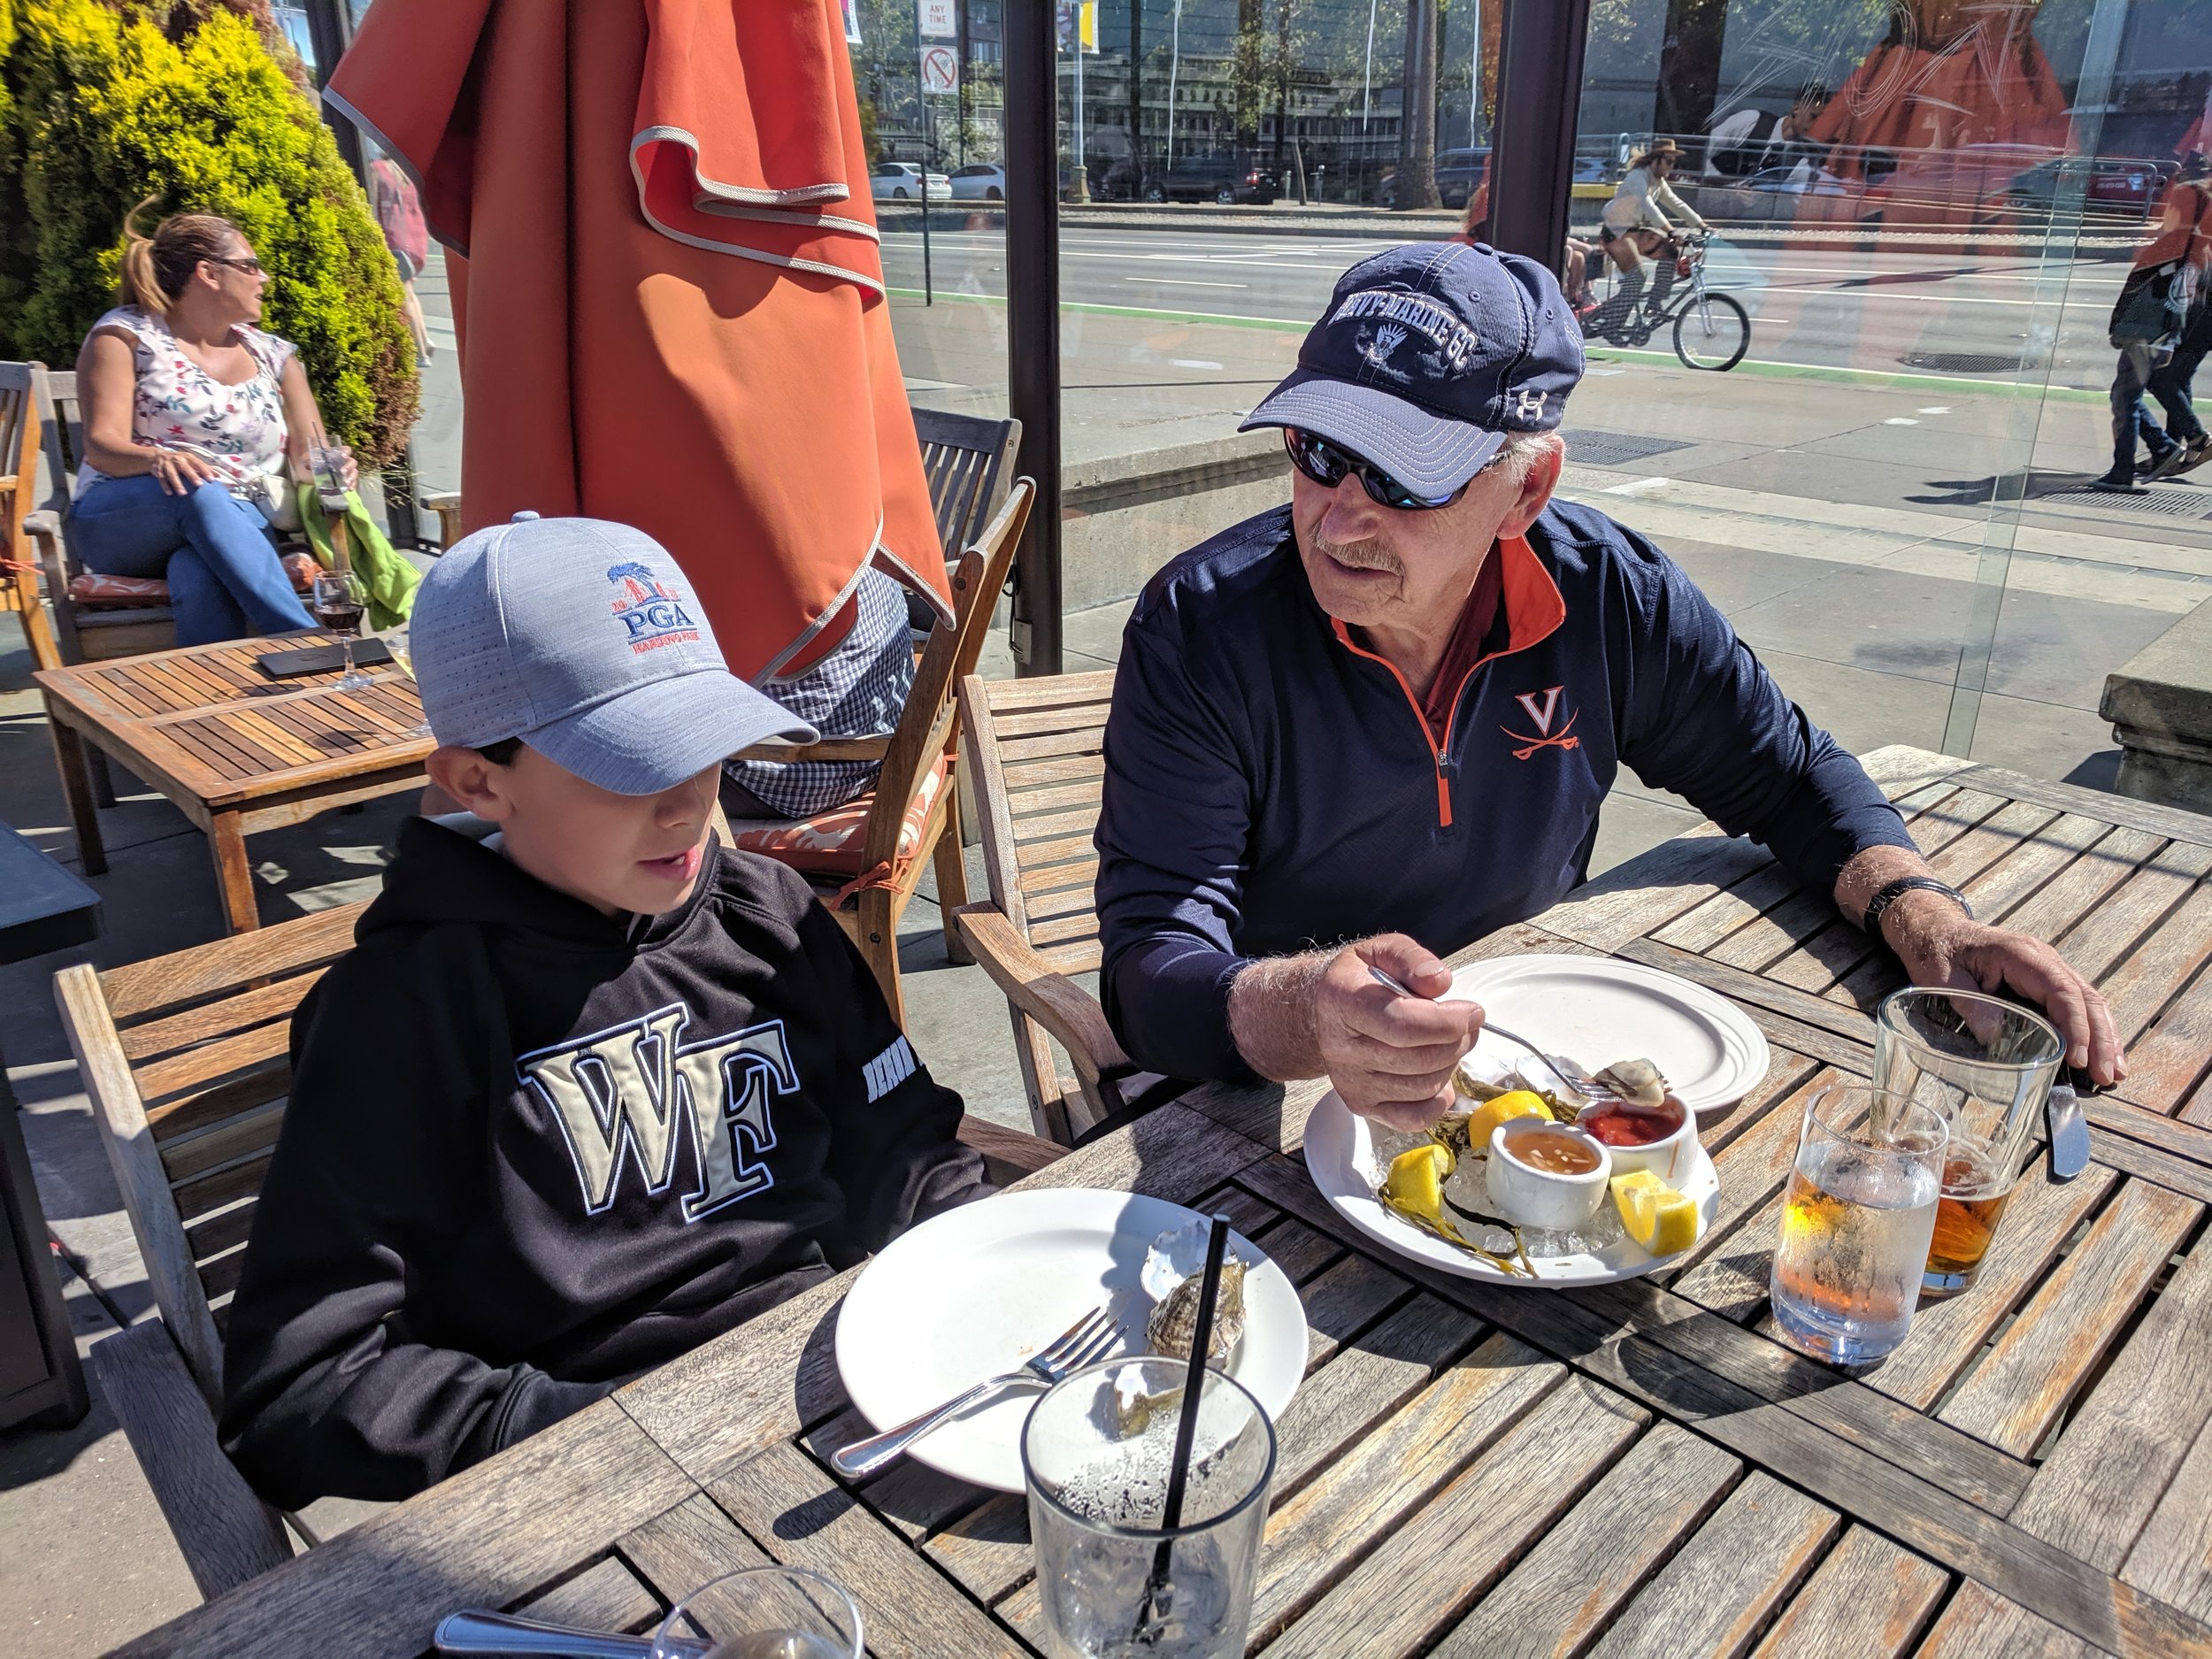  Jackson and Grumpy sharing some oysters along the Embarcadero in San Francisco. 